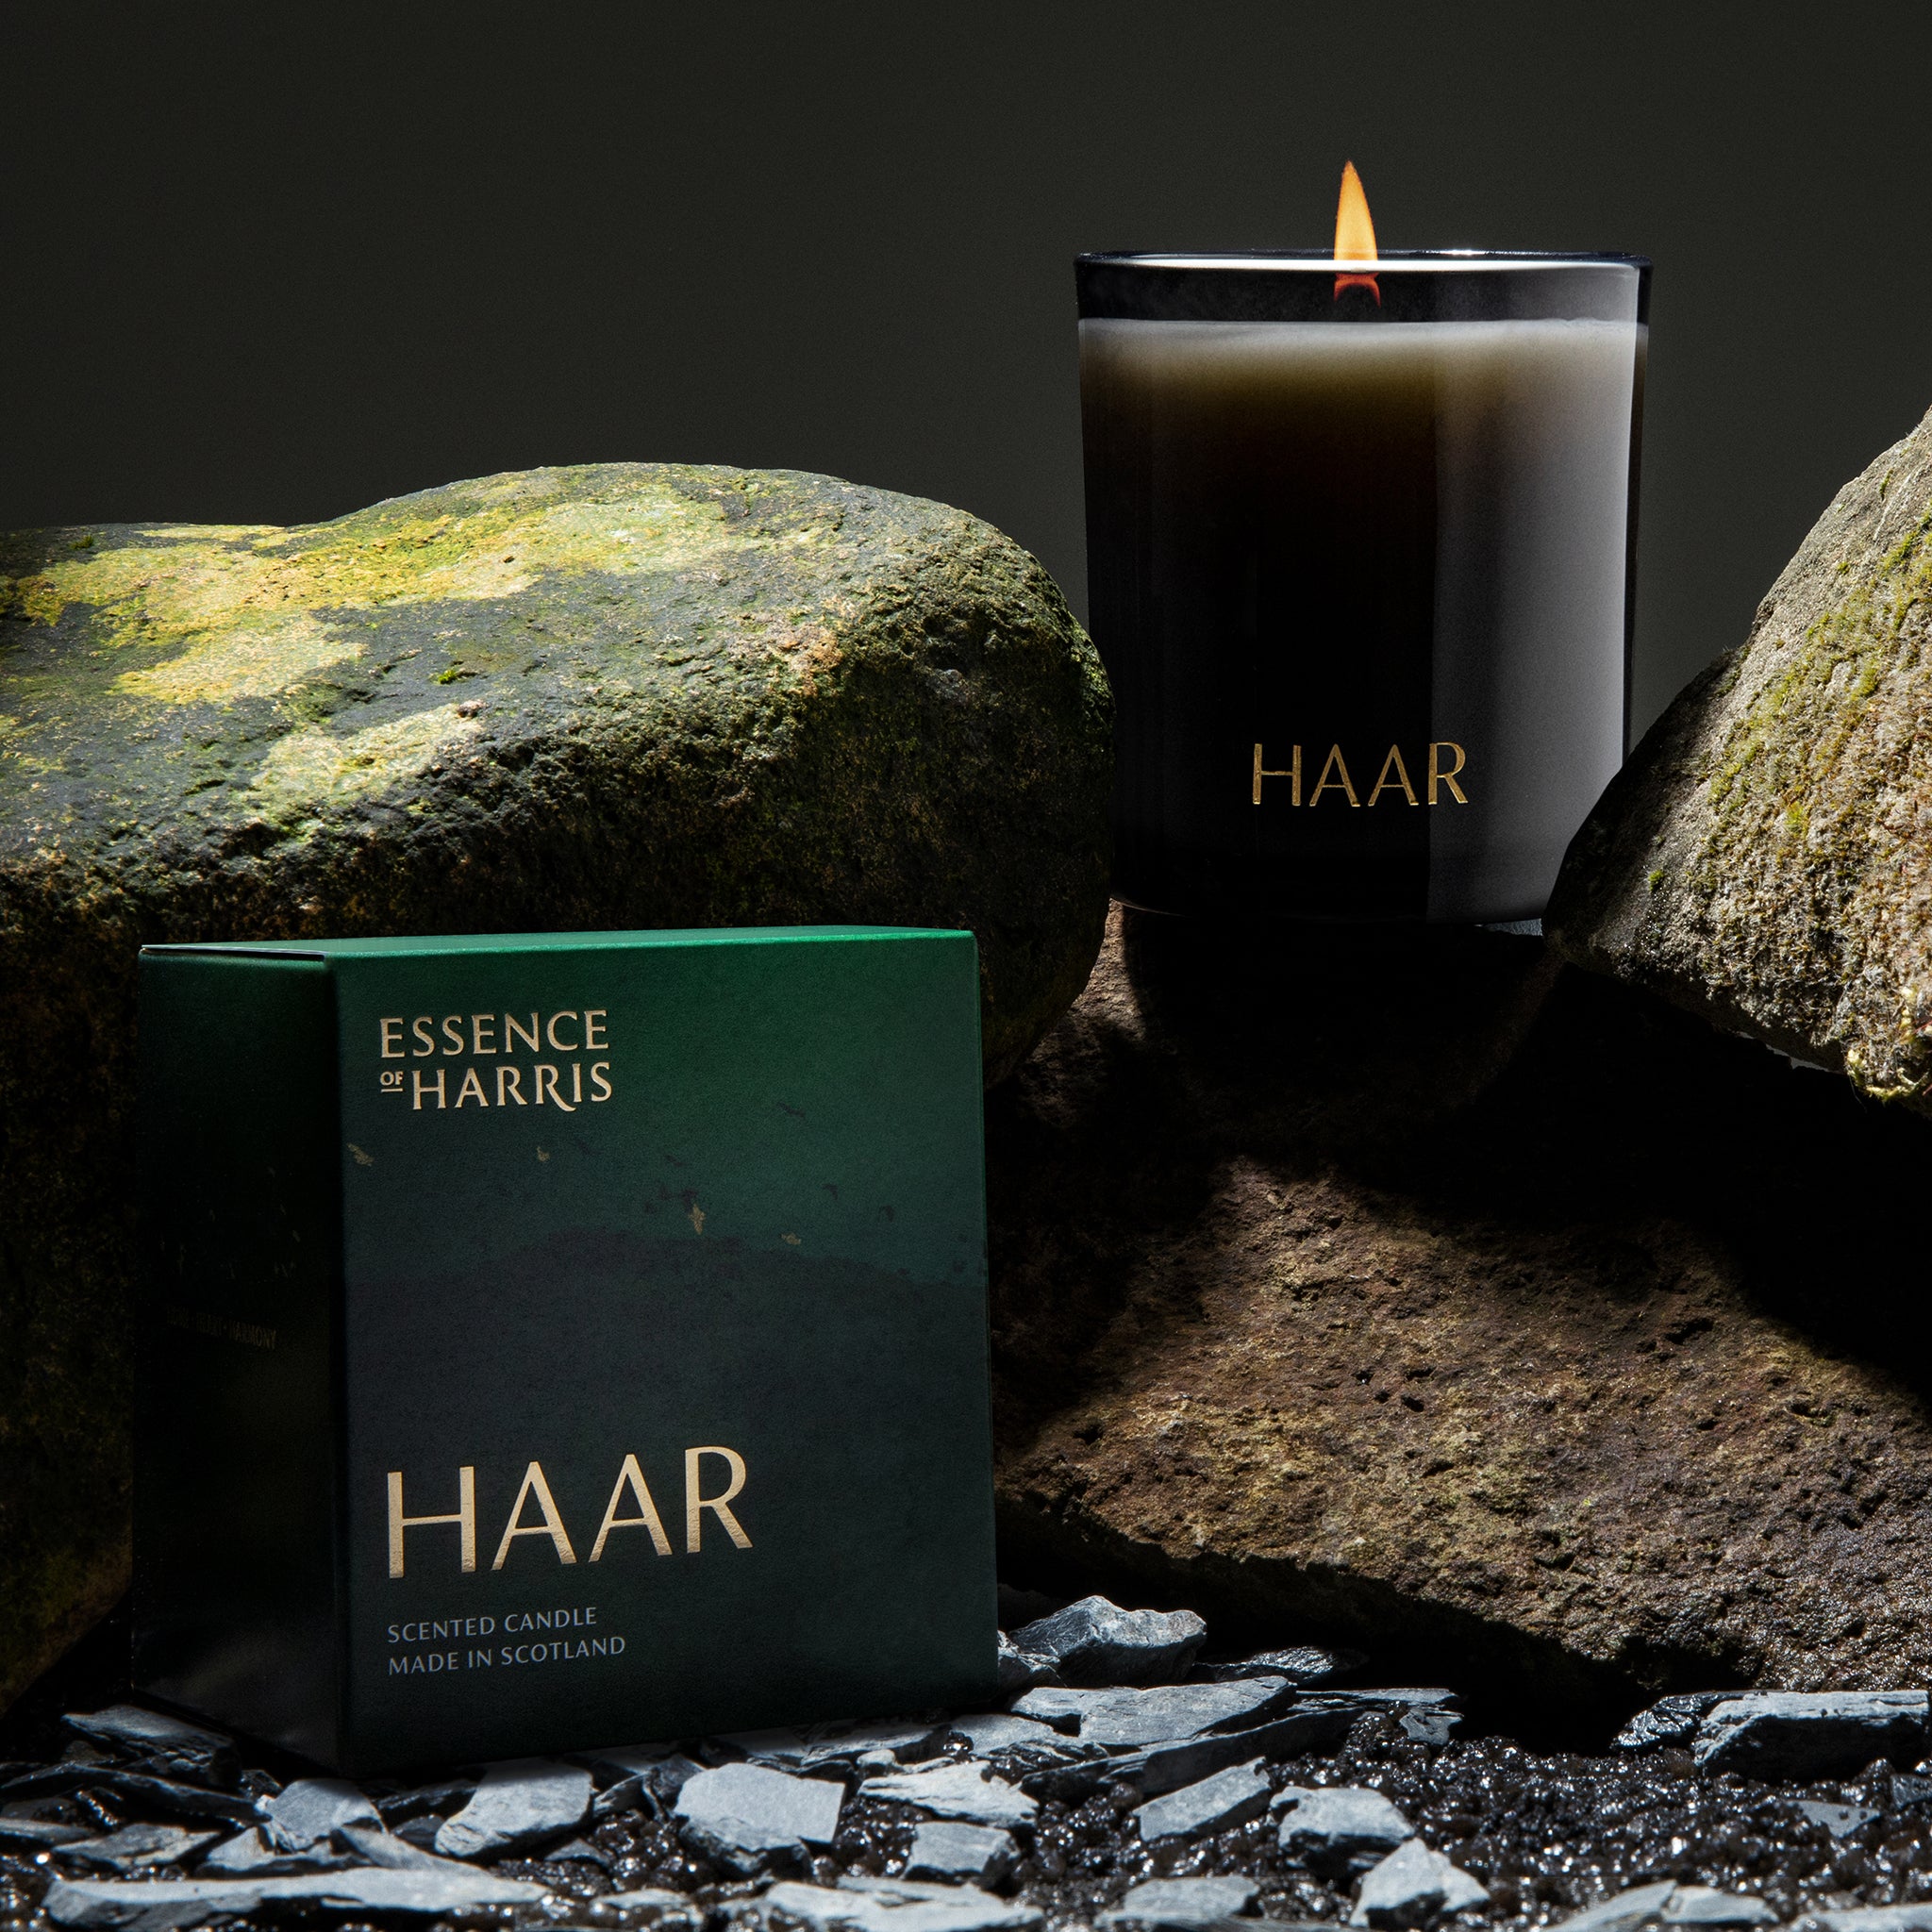 Haar, fig leaf and cedar soy wax candle in black vessel next to green box